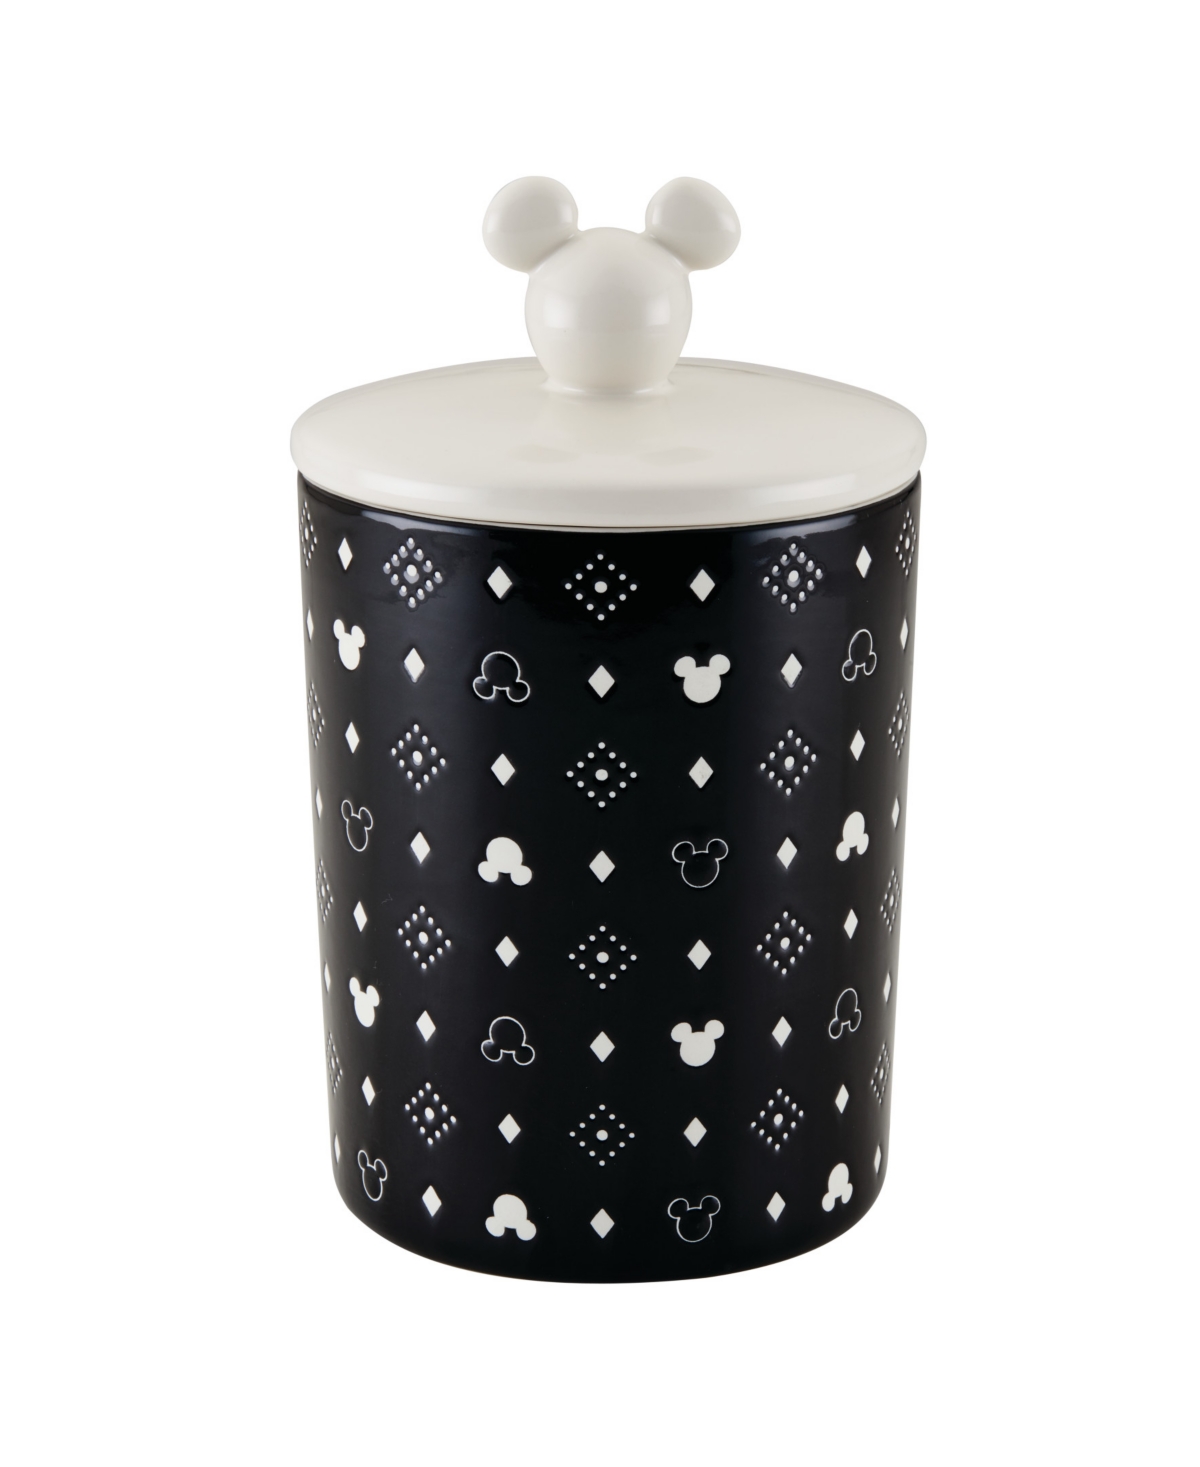 Shop Disney Monochrome Ceramic 7-cup Canister In Black